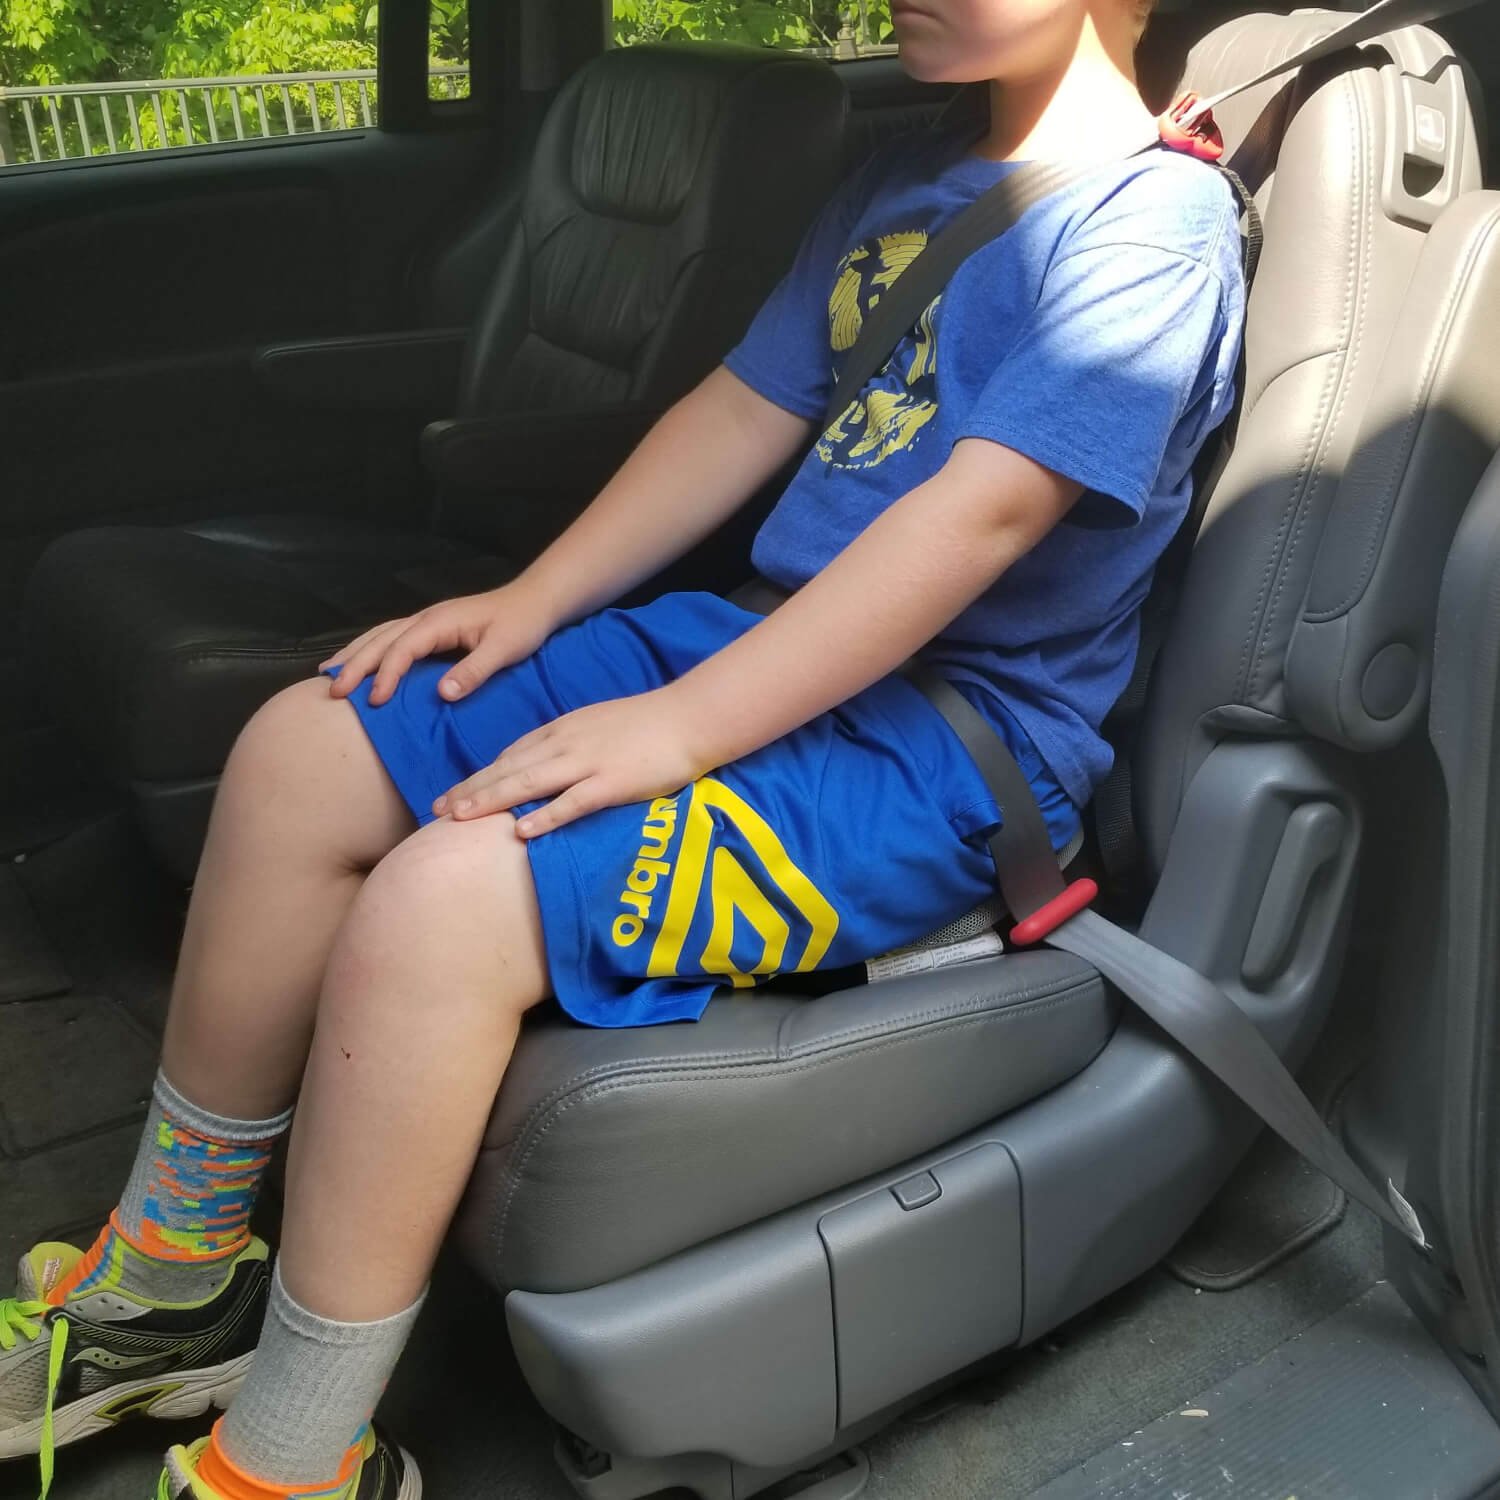 Stricter child car seat law may mean longer booster seat use